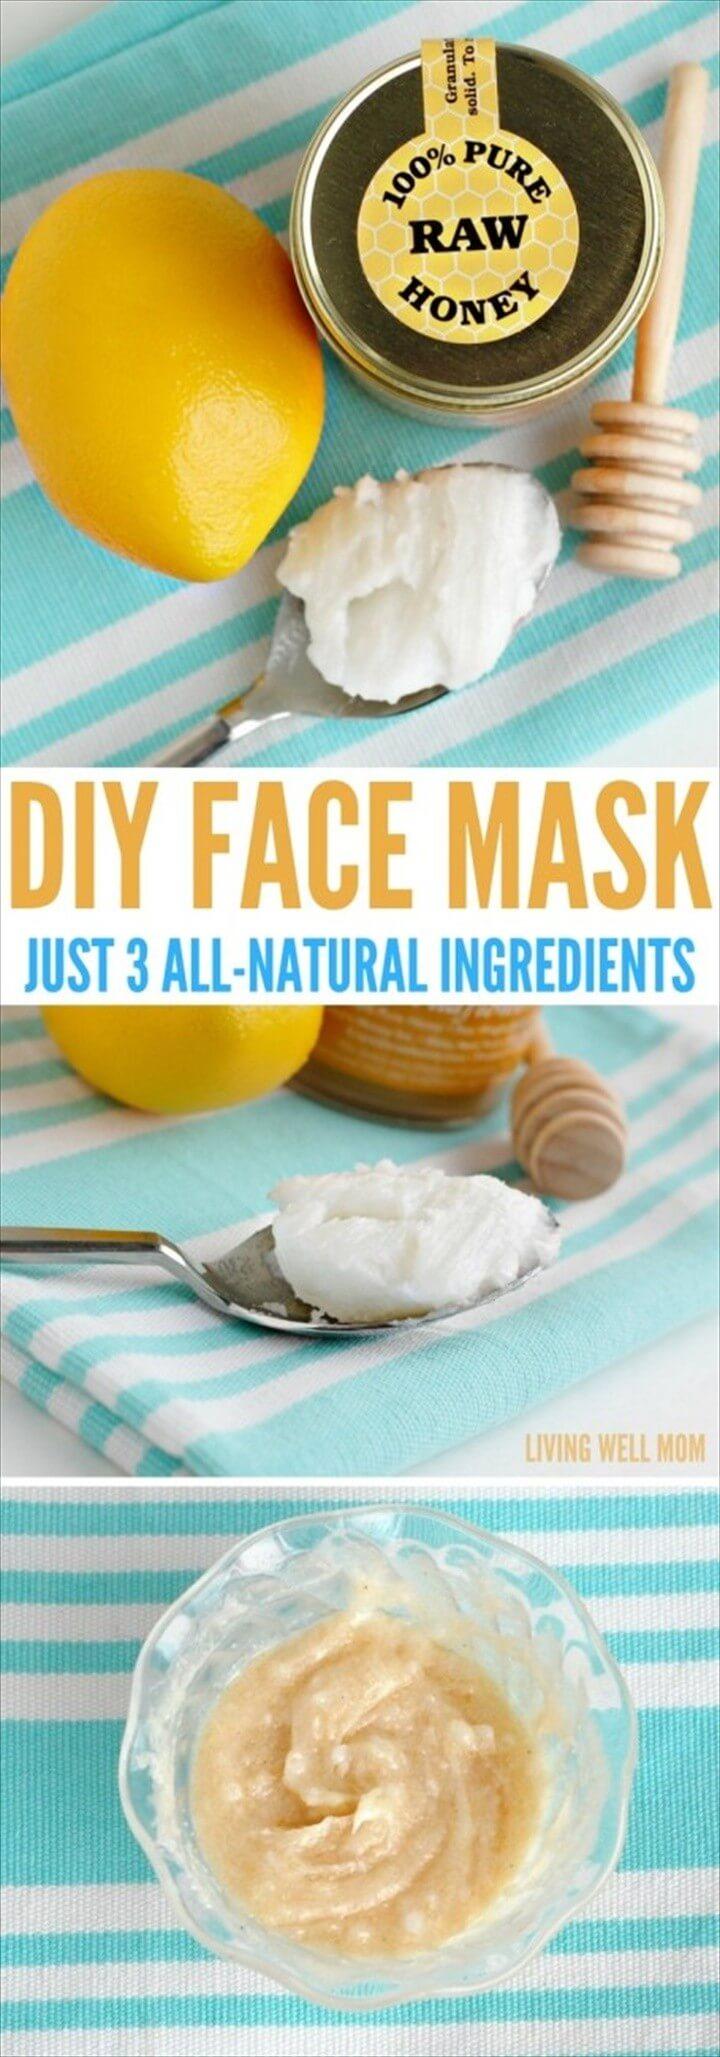 DIY Face Mask Just 3 All Natural Ingredients Collage